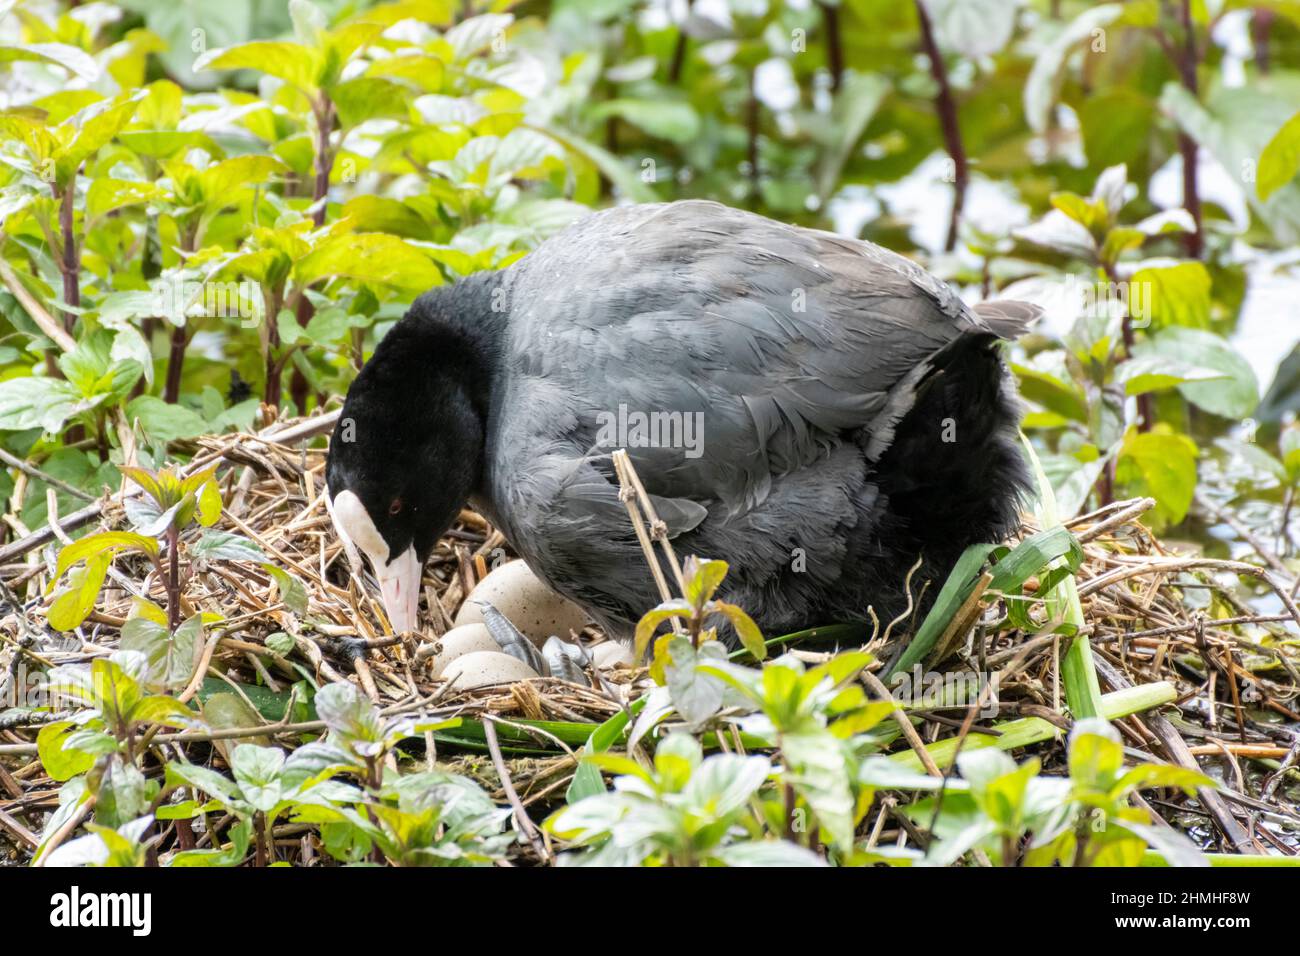 Coot (Fulica atra), in its nest. Stock Photo